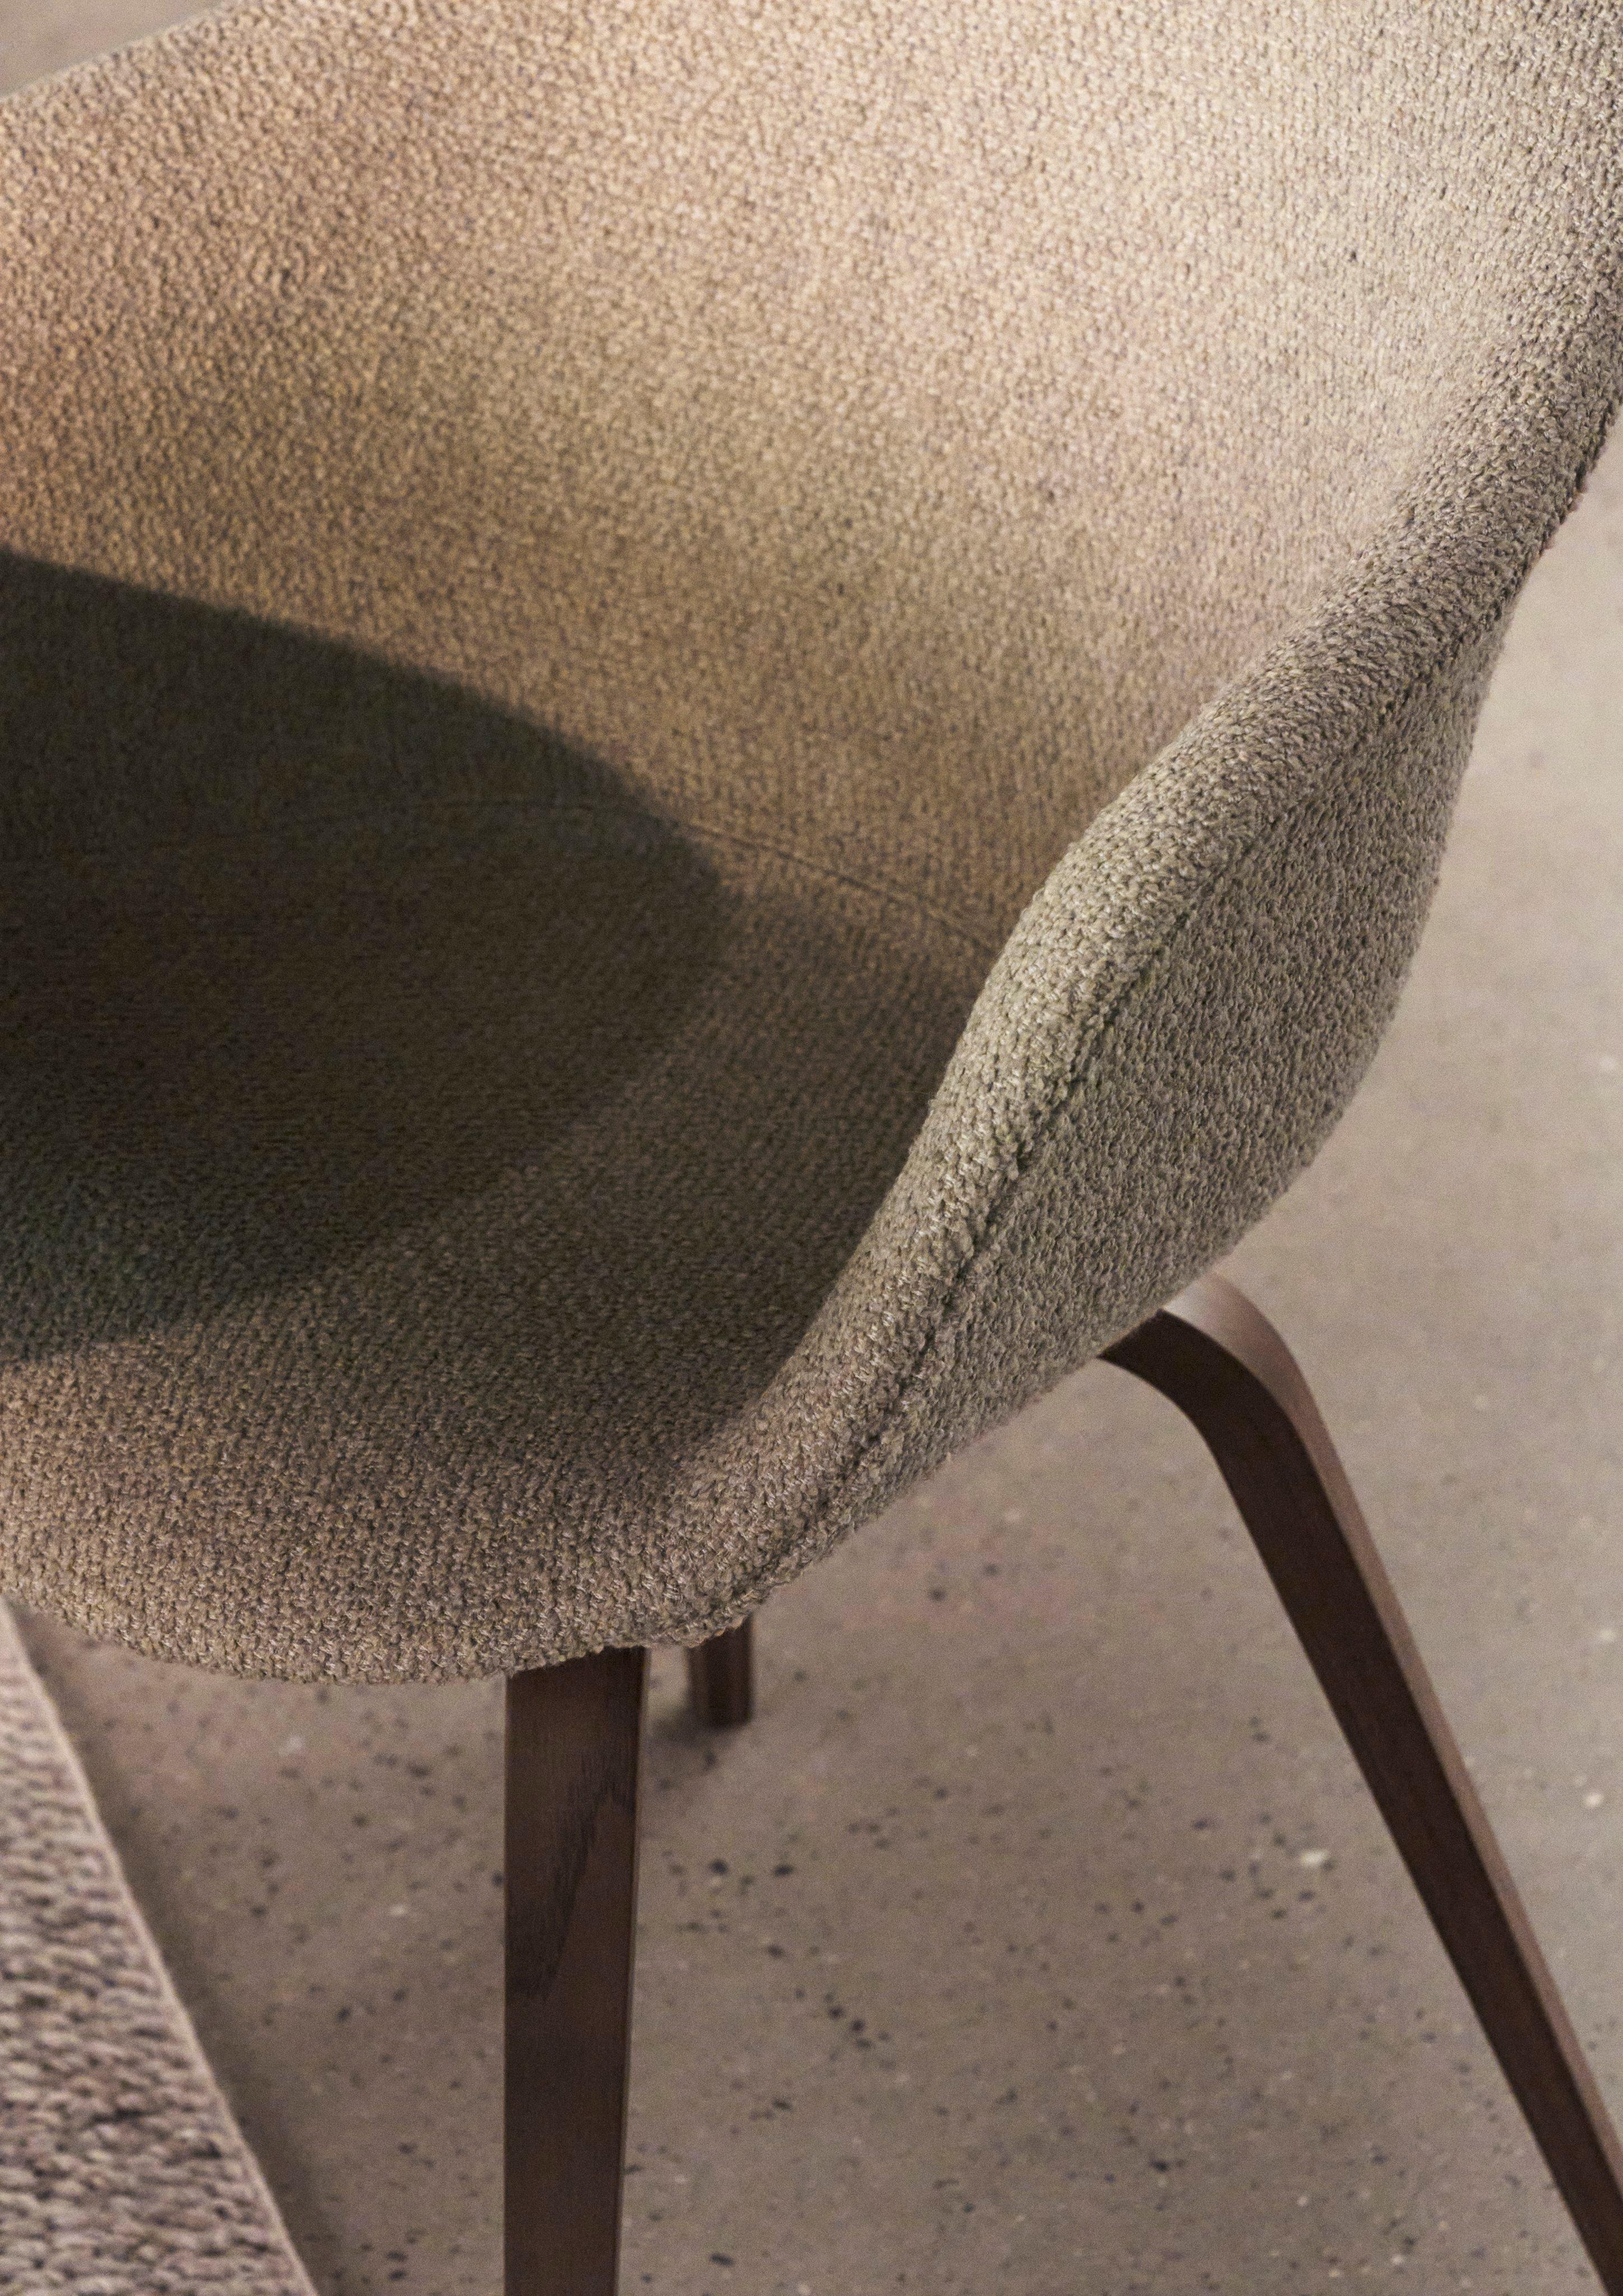 A close-up view of the cocooning Hauge dining chair upholstered in beige Lazio fabric.